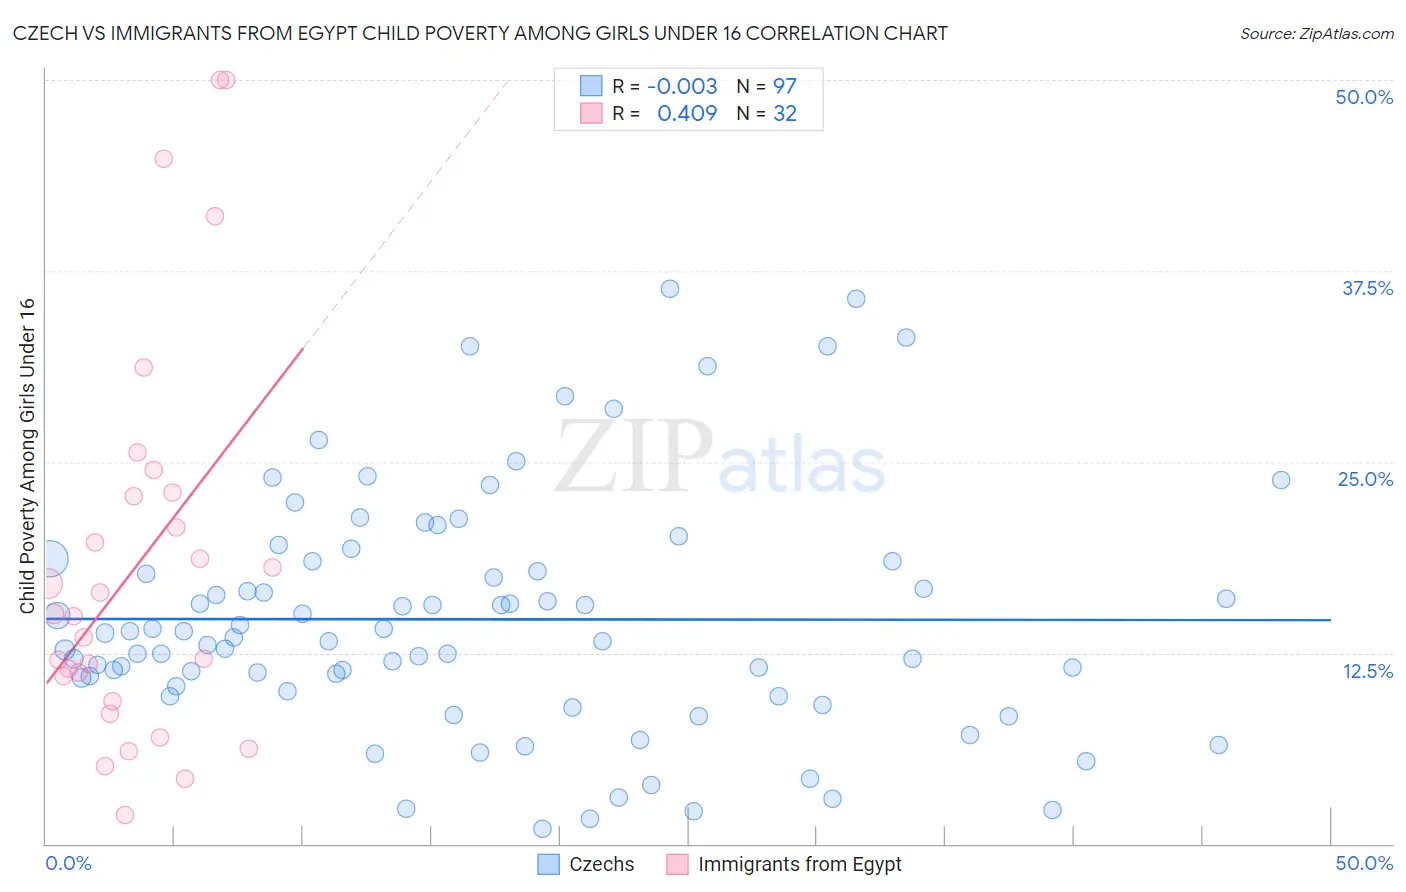 Czech vs Immigrants from Egypt Child Poverty Among Girls Under 16